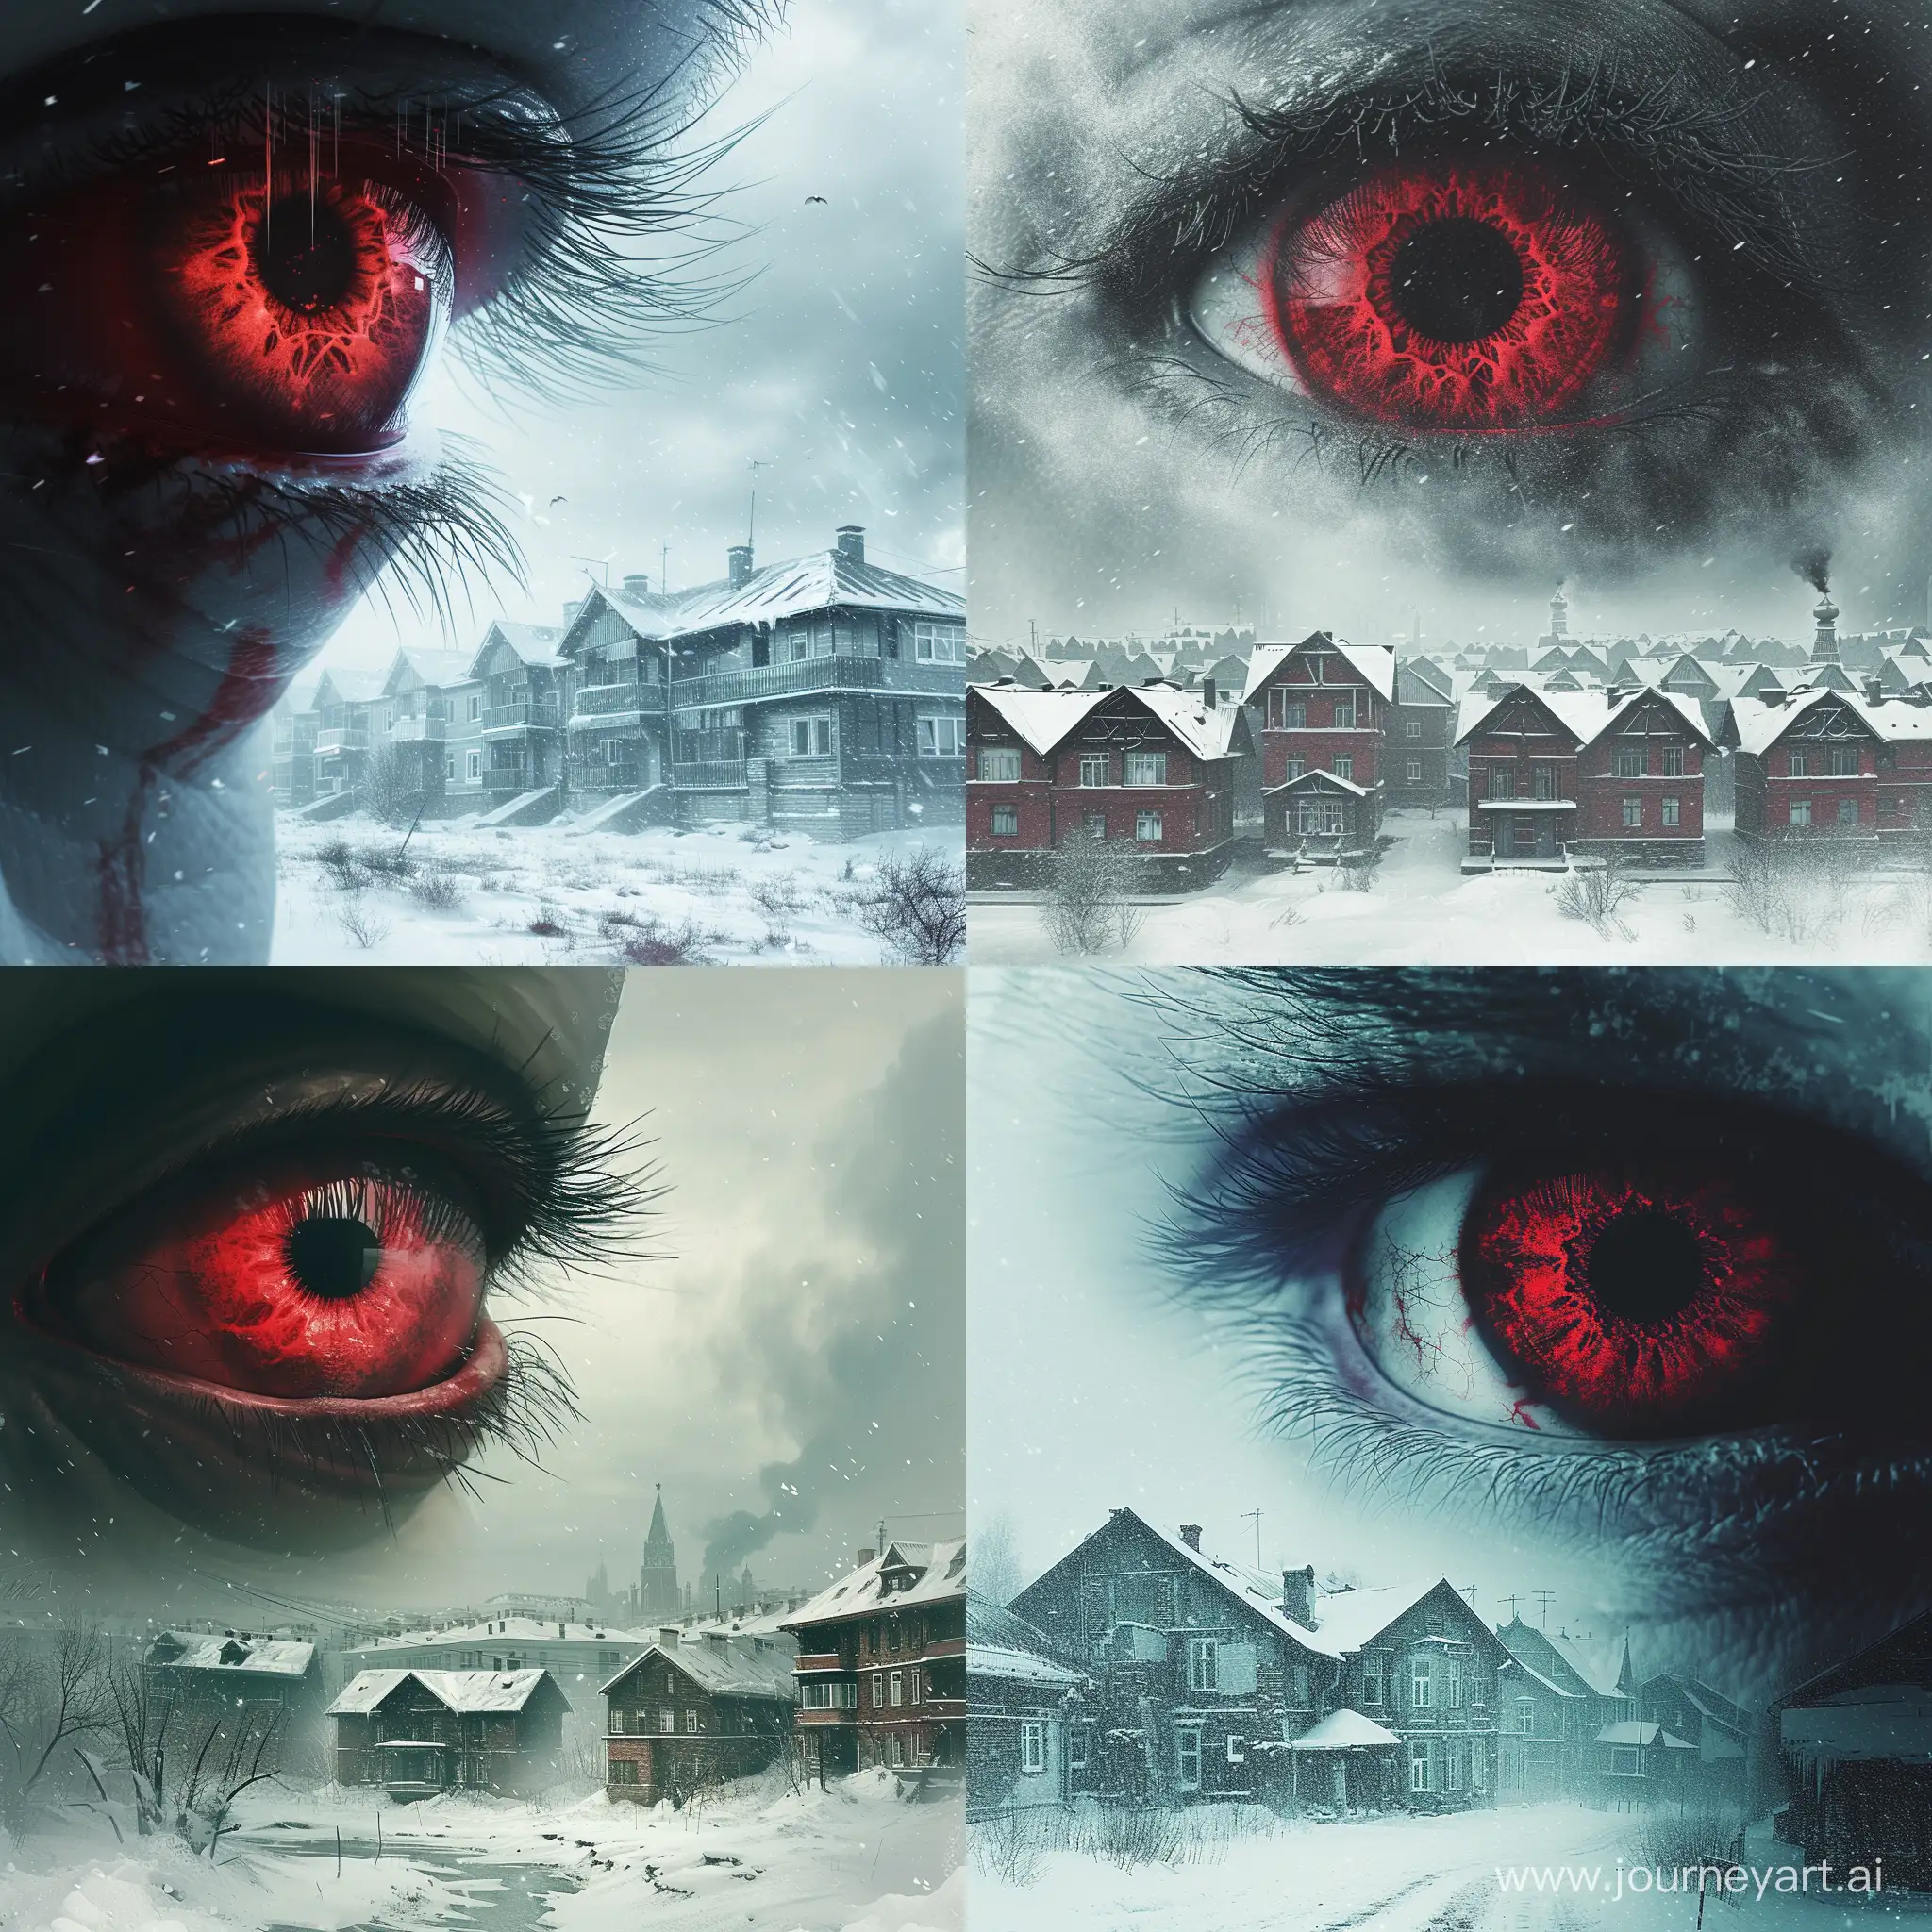 A red human eyeball stares into the distance pondering the consequences of the past, against a backdrop of snow and blizzard, 20th century Russian seven-story houses, in a setting of utter hopelessness and remorse, in dramatic style